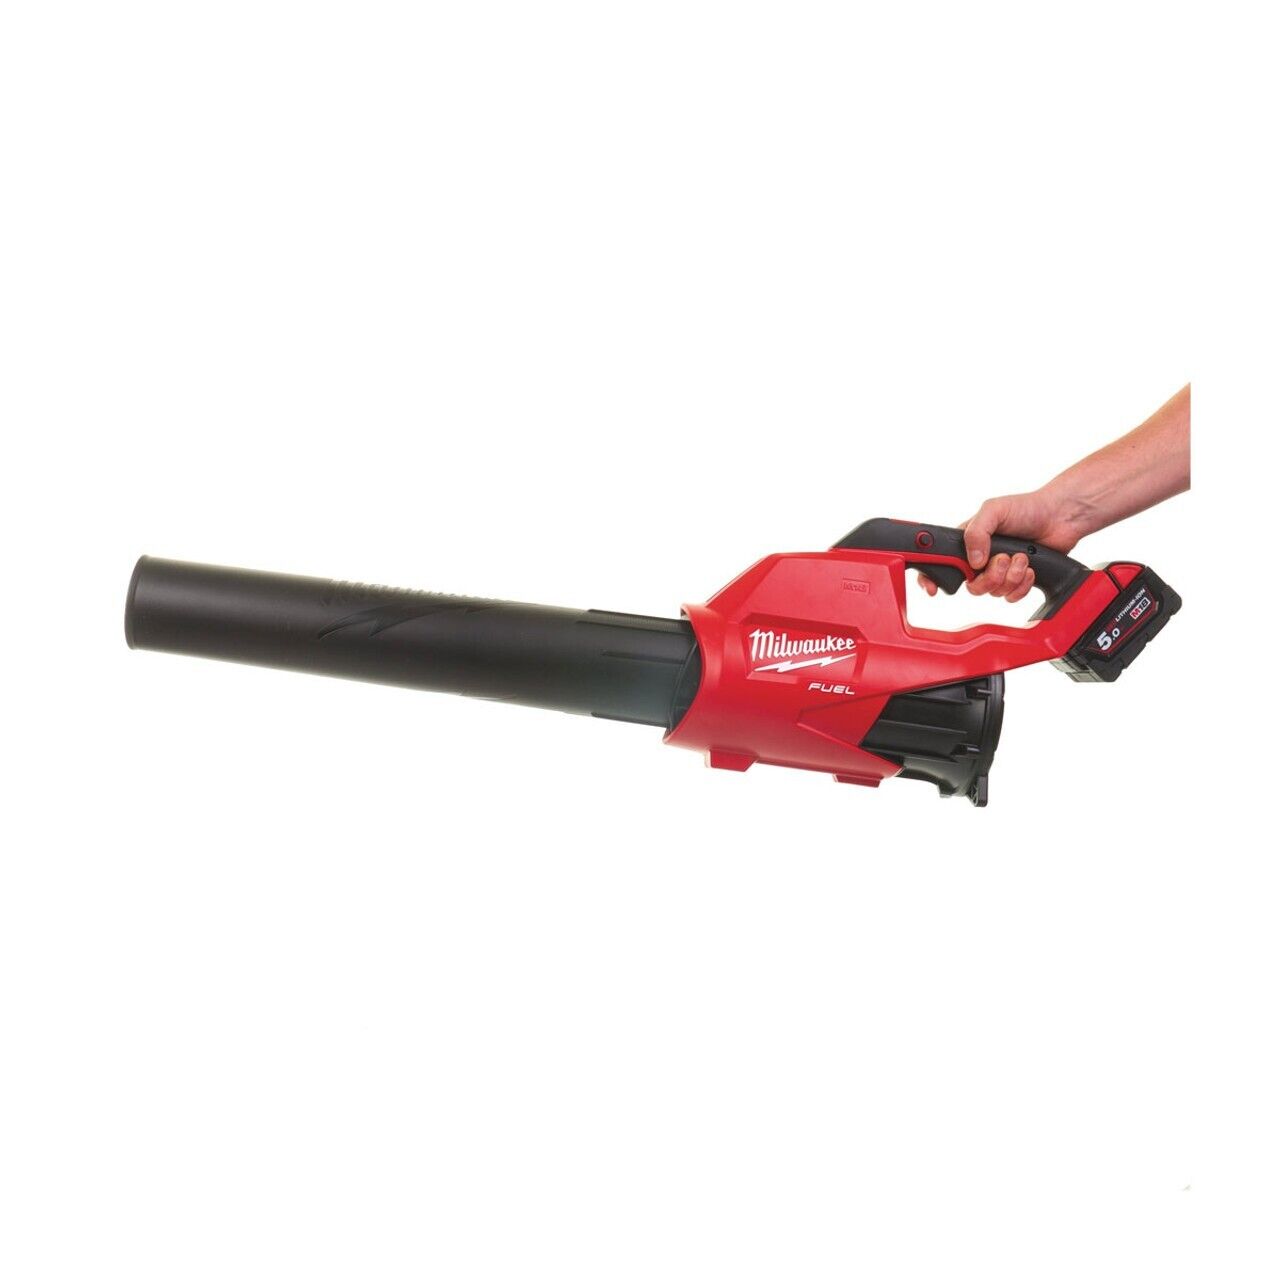 Milwaukee M18FBL-0 18v Fuel Compact Blower 2nd Generation Bare Unit